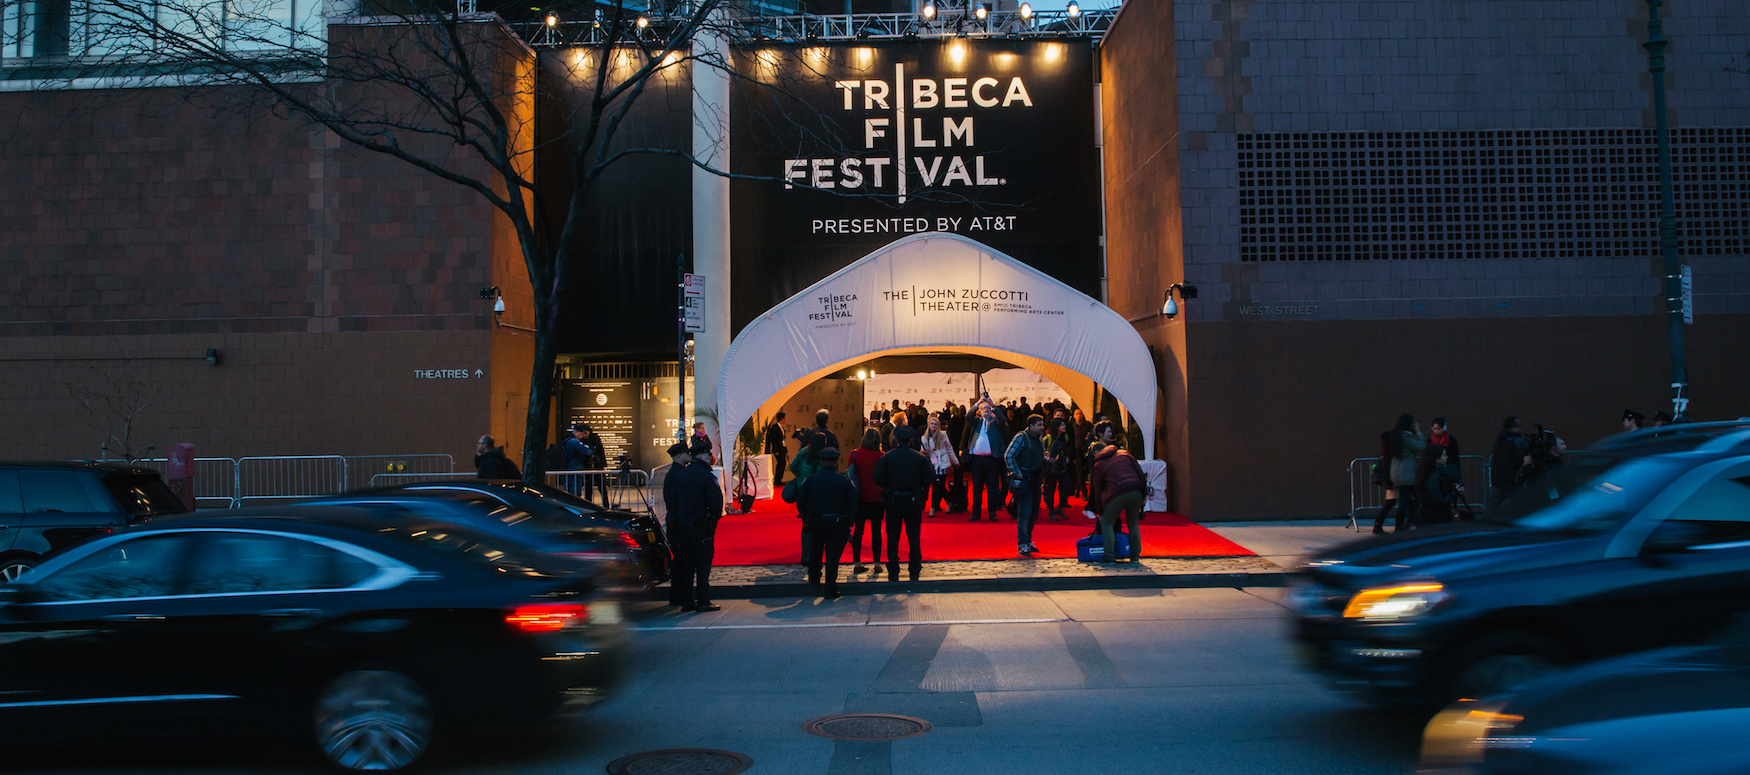 Video First Look at the Success of the Tribeca Film Festival